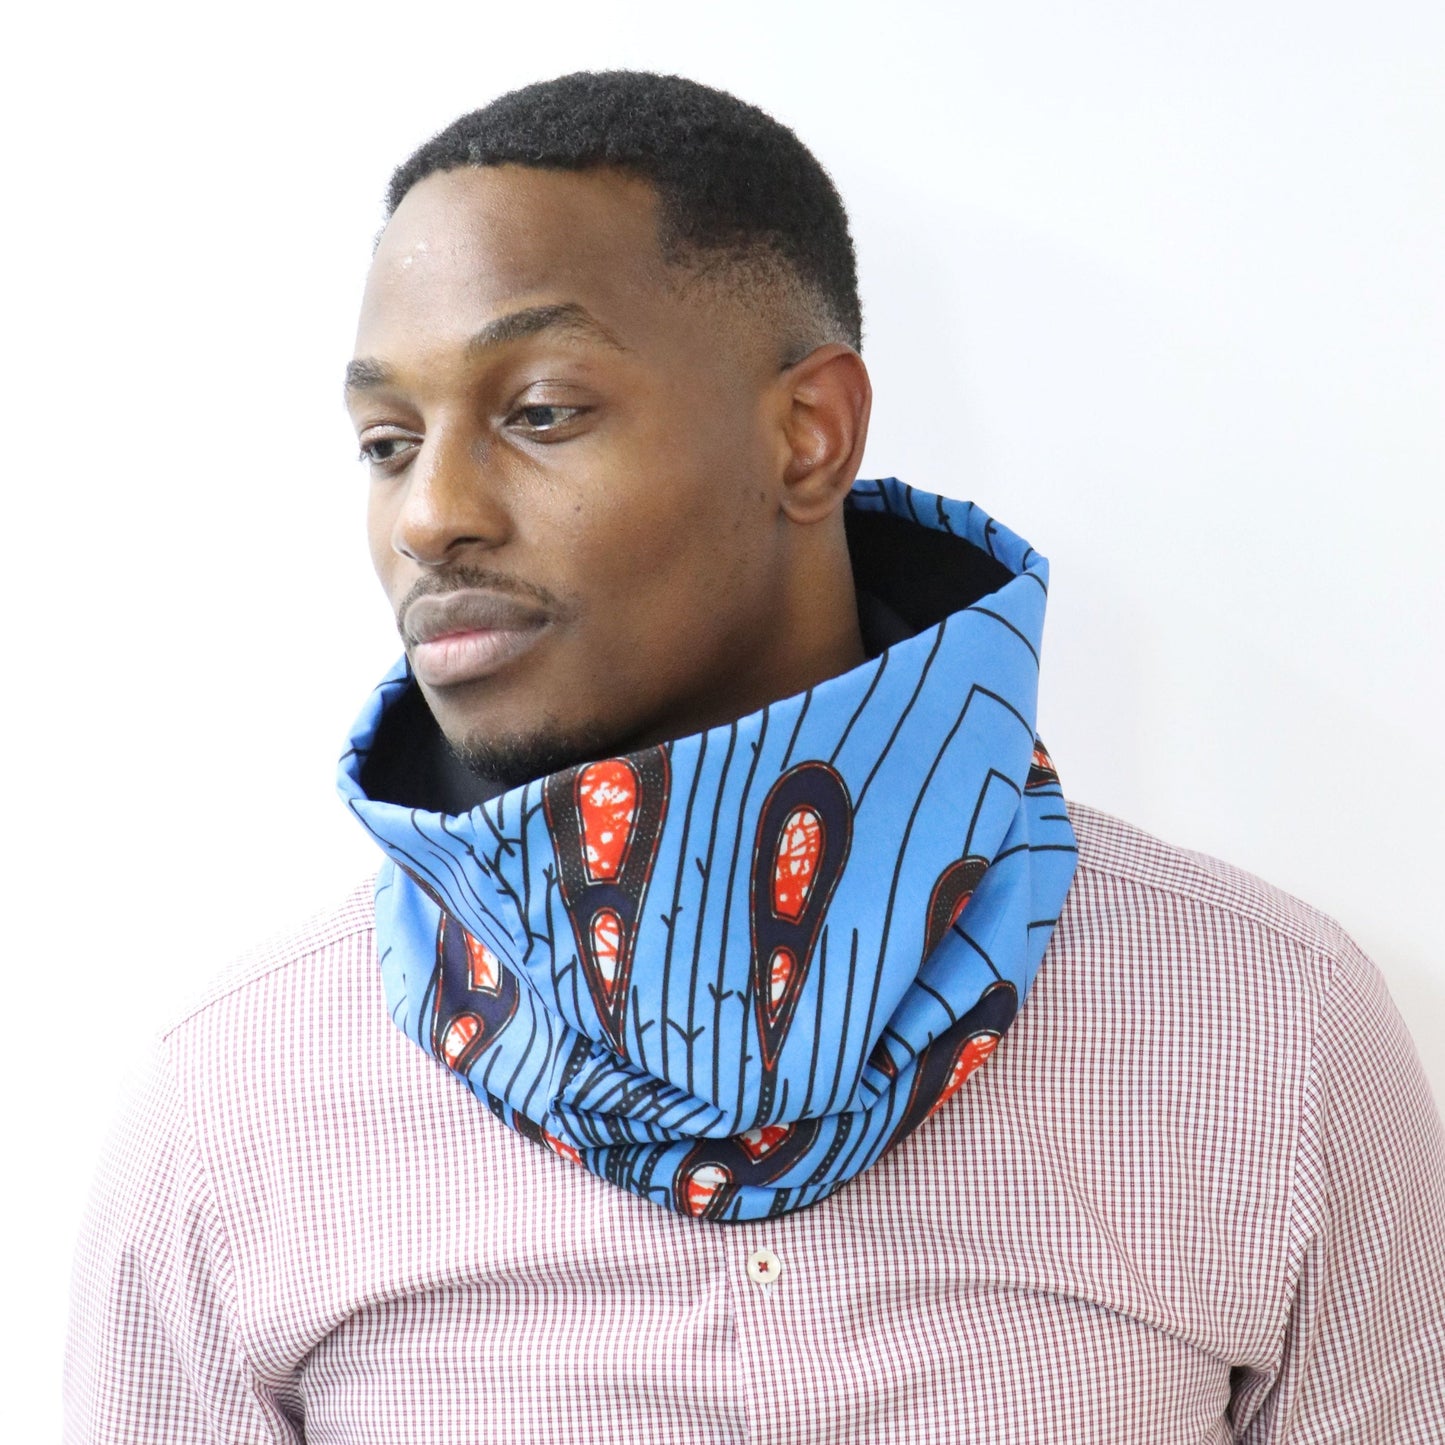 Blue African print neck warmer / cowl / scarf / snood